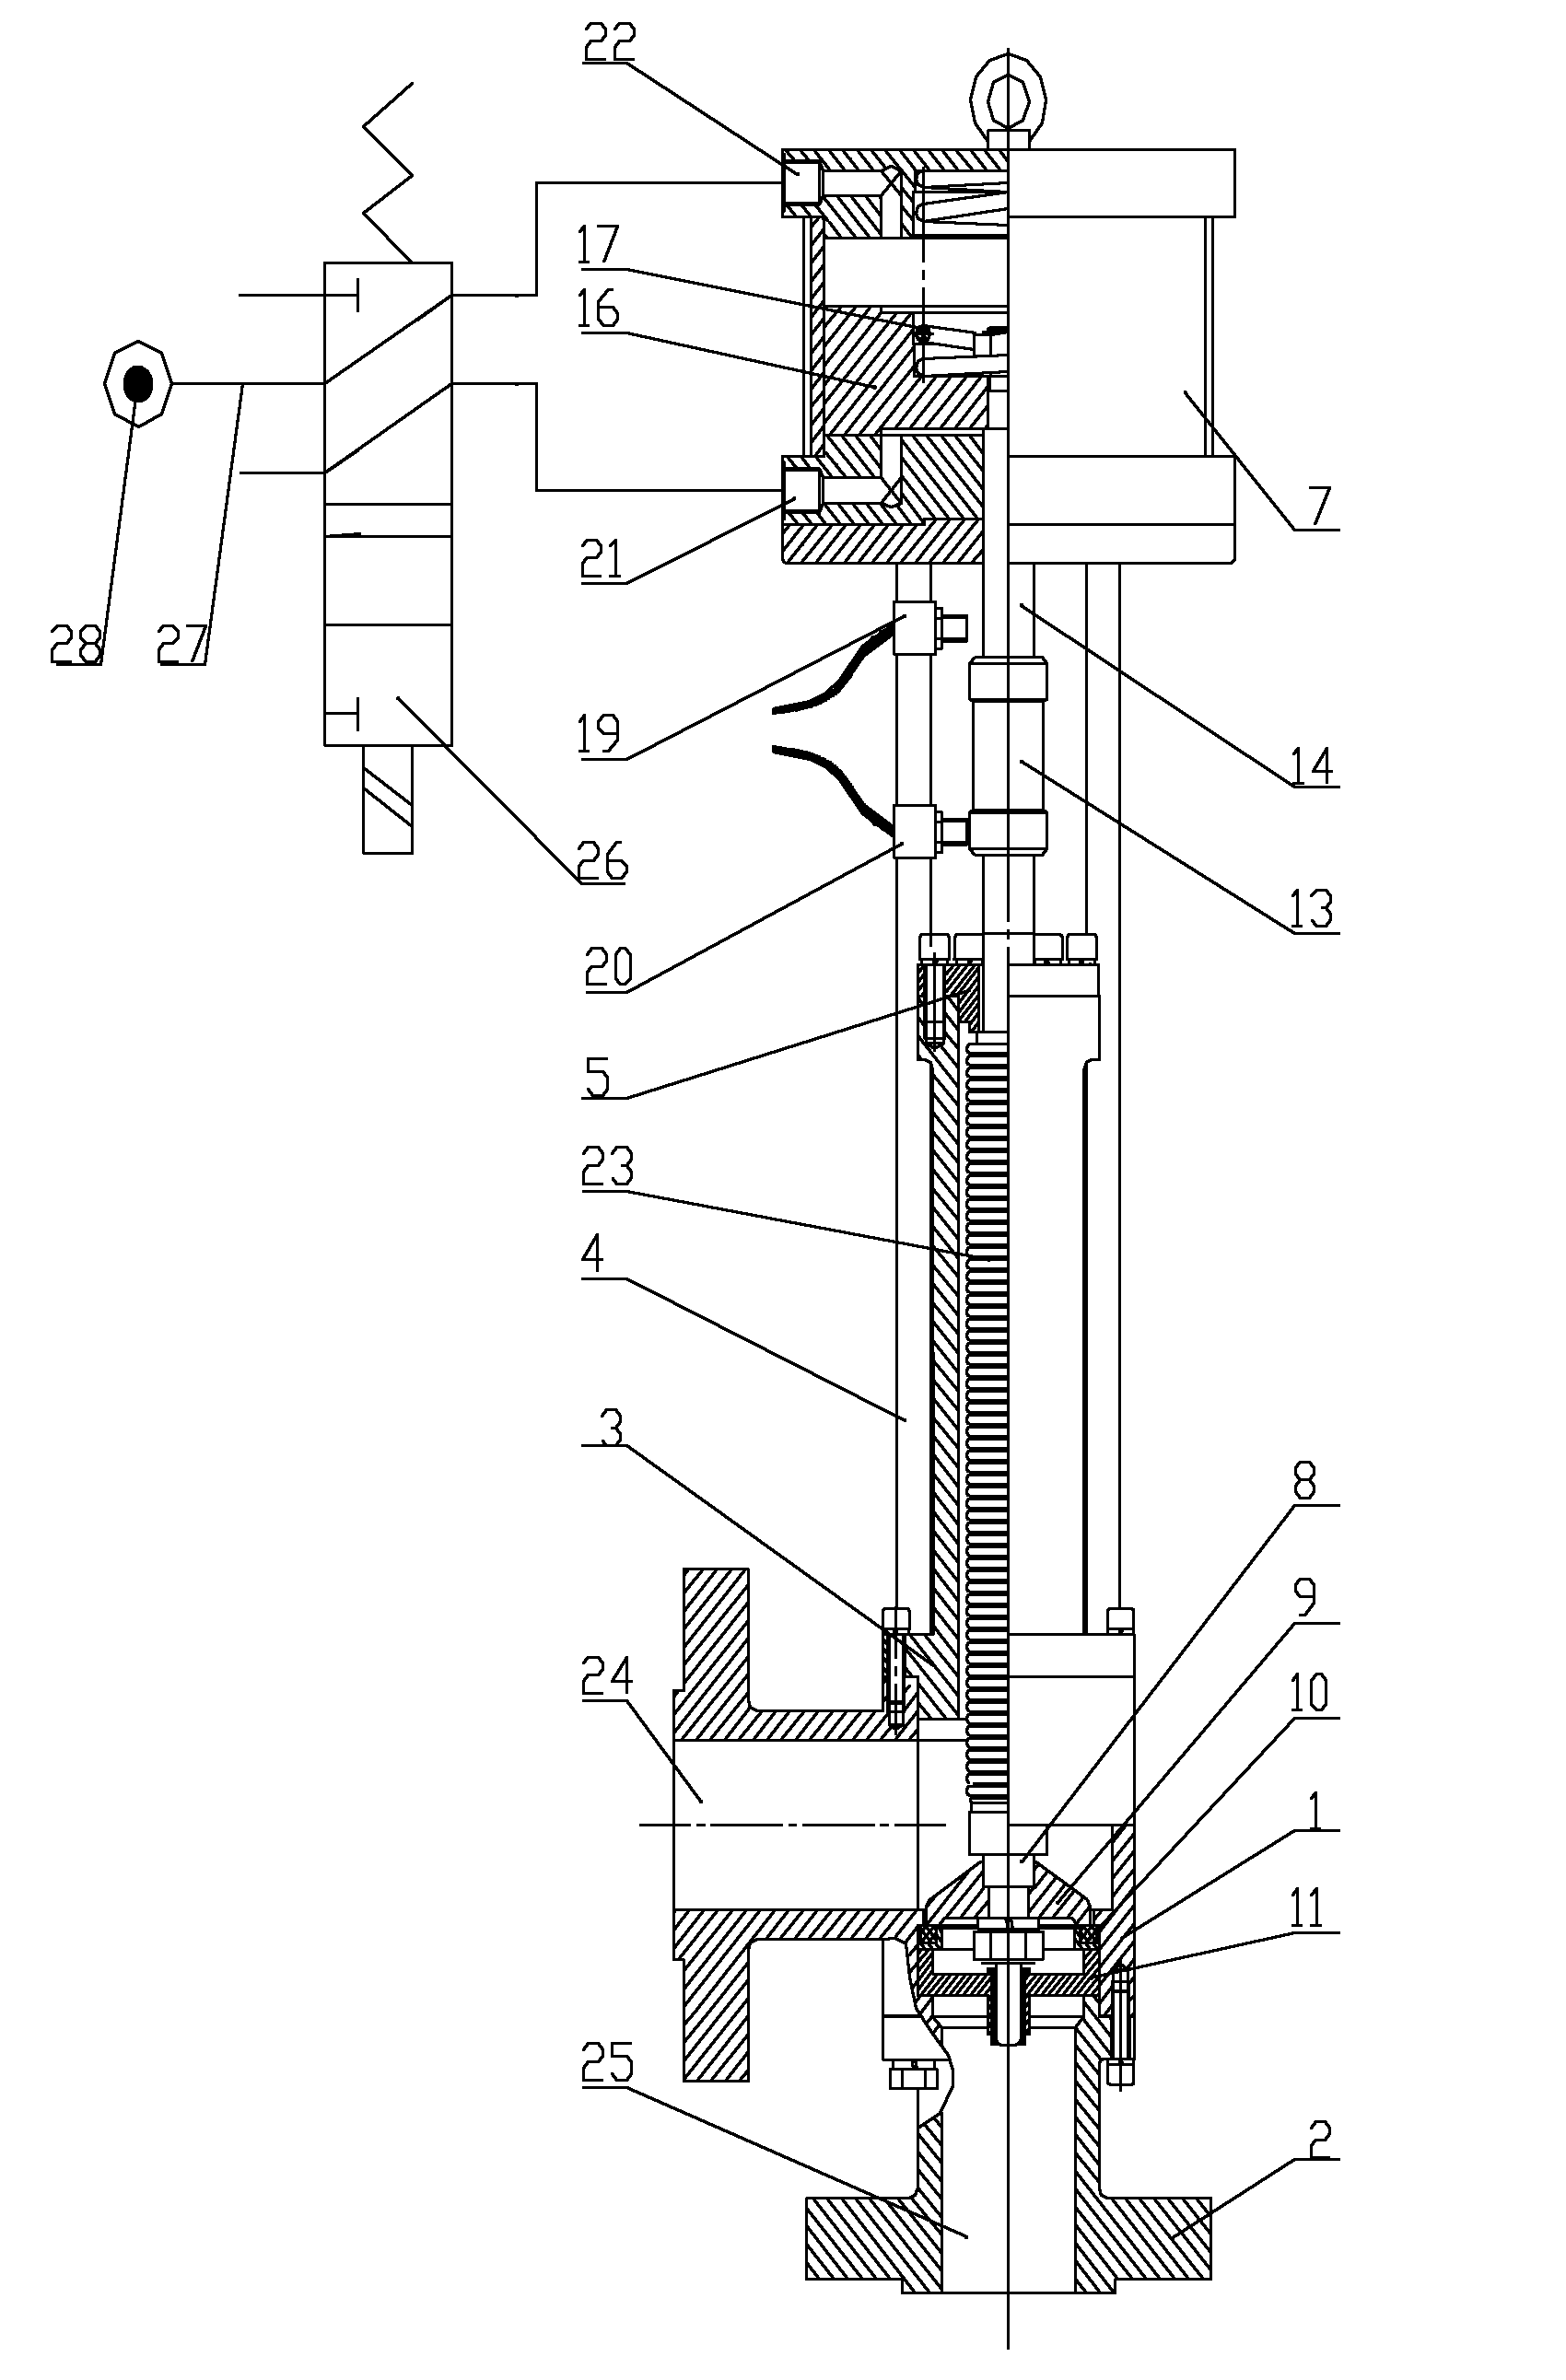 Pneumatic pulse valve capable of continuously and automatically opening and closing